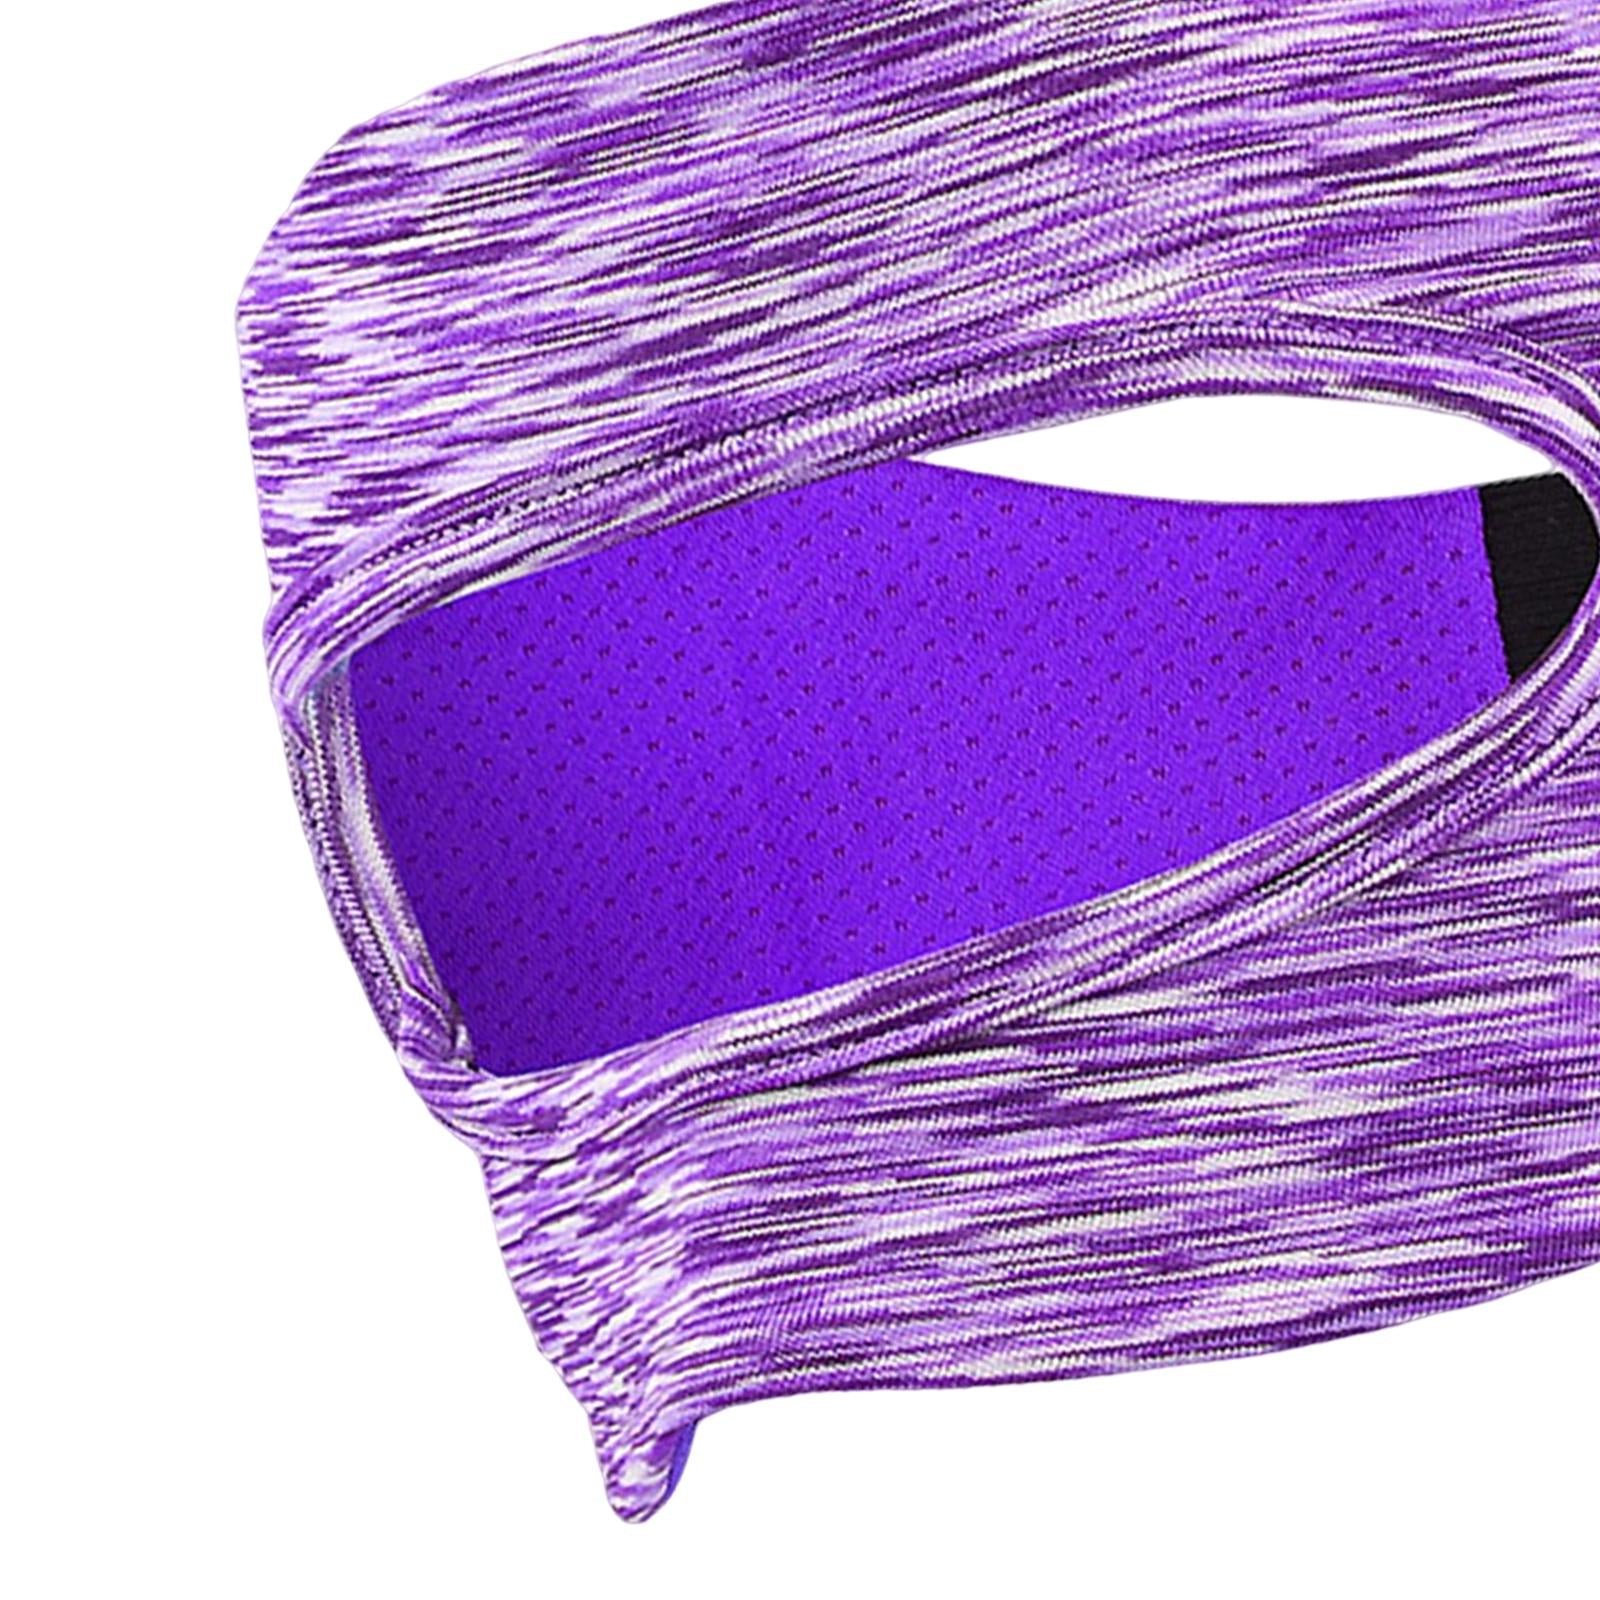 Virtual Reality VR Masks for Quest 2 Elastic Material Home Supplies Purple